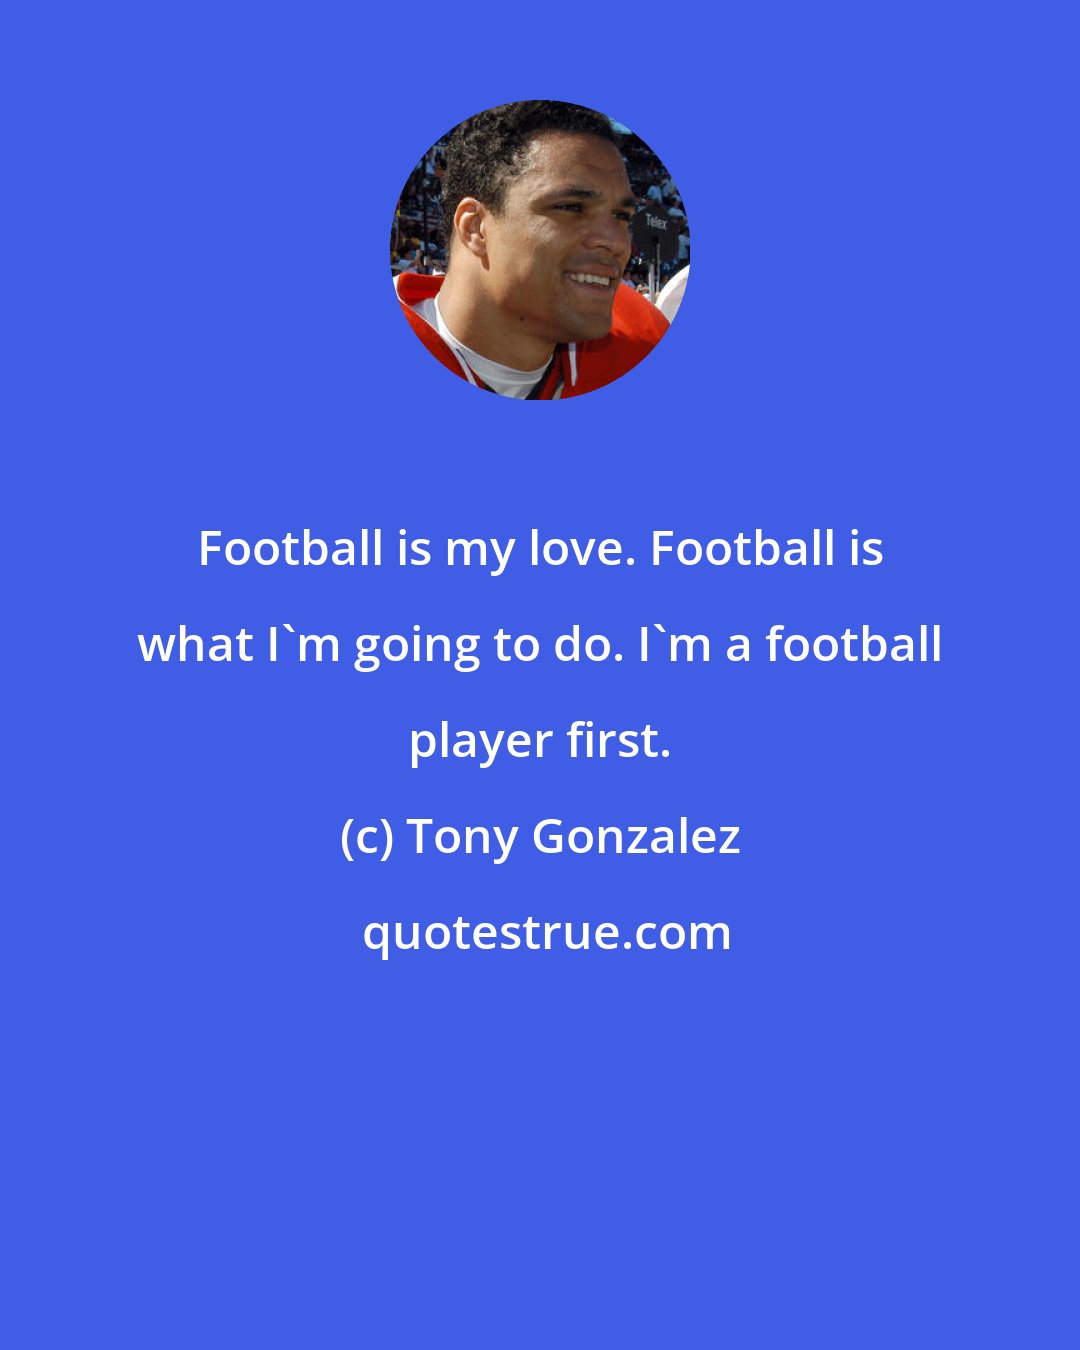 Tony Gonzalez: Football is my love. Football is what I'm going to do. I'm a football player first.